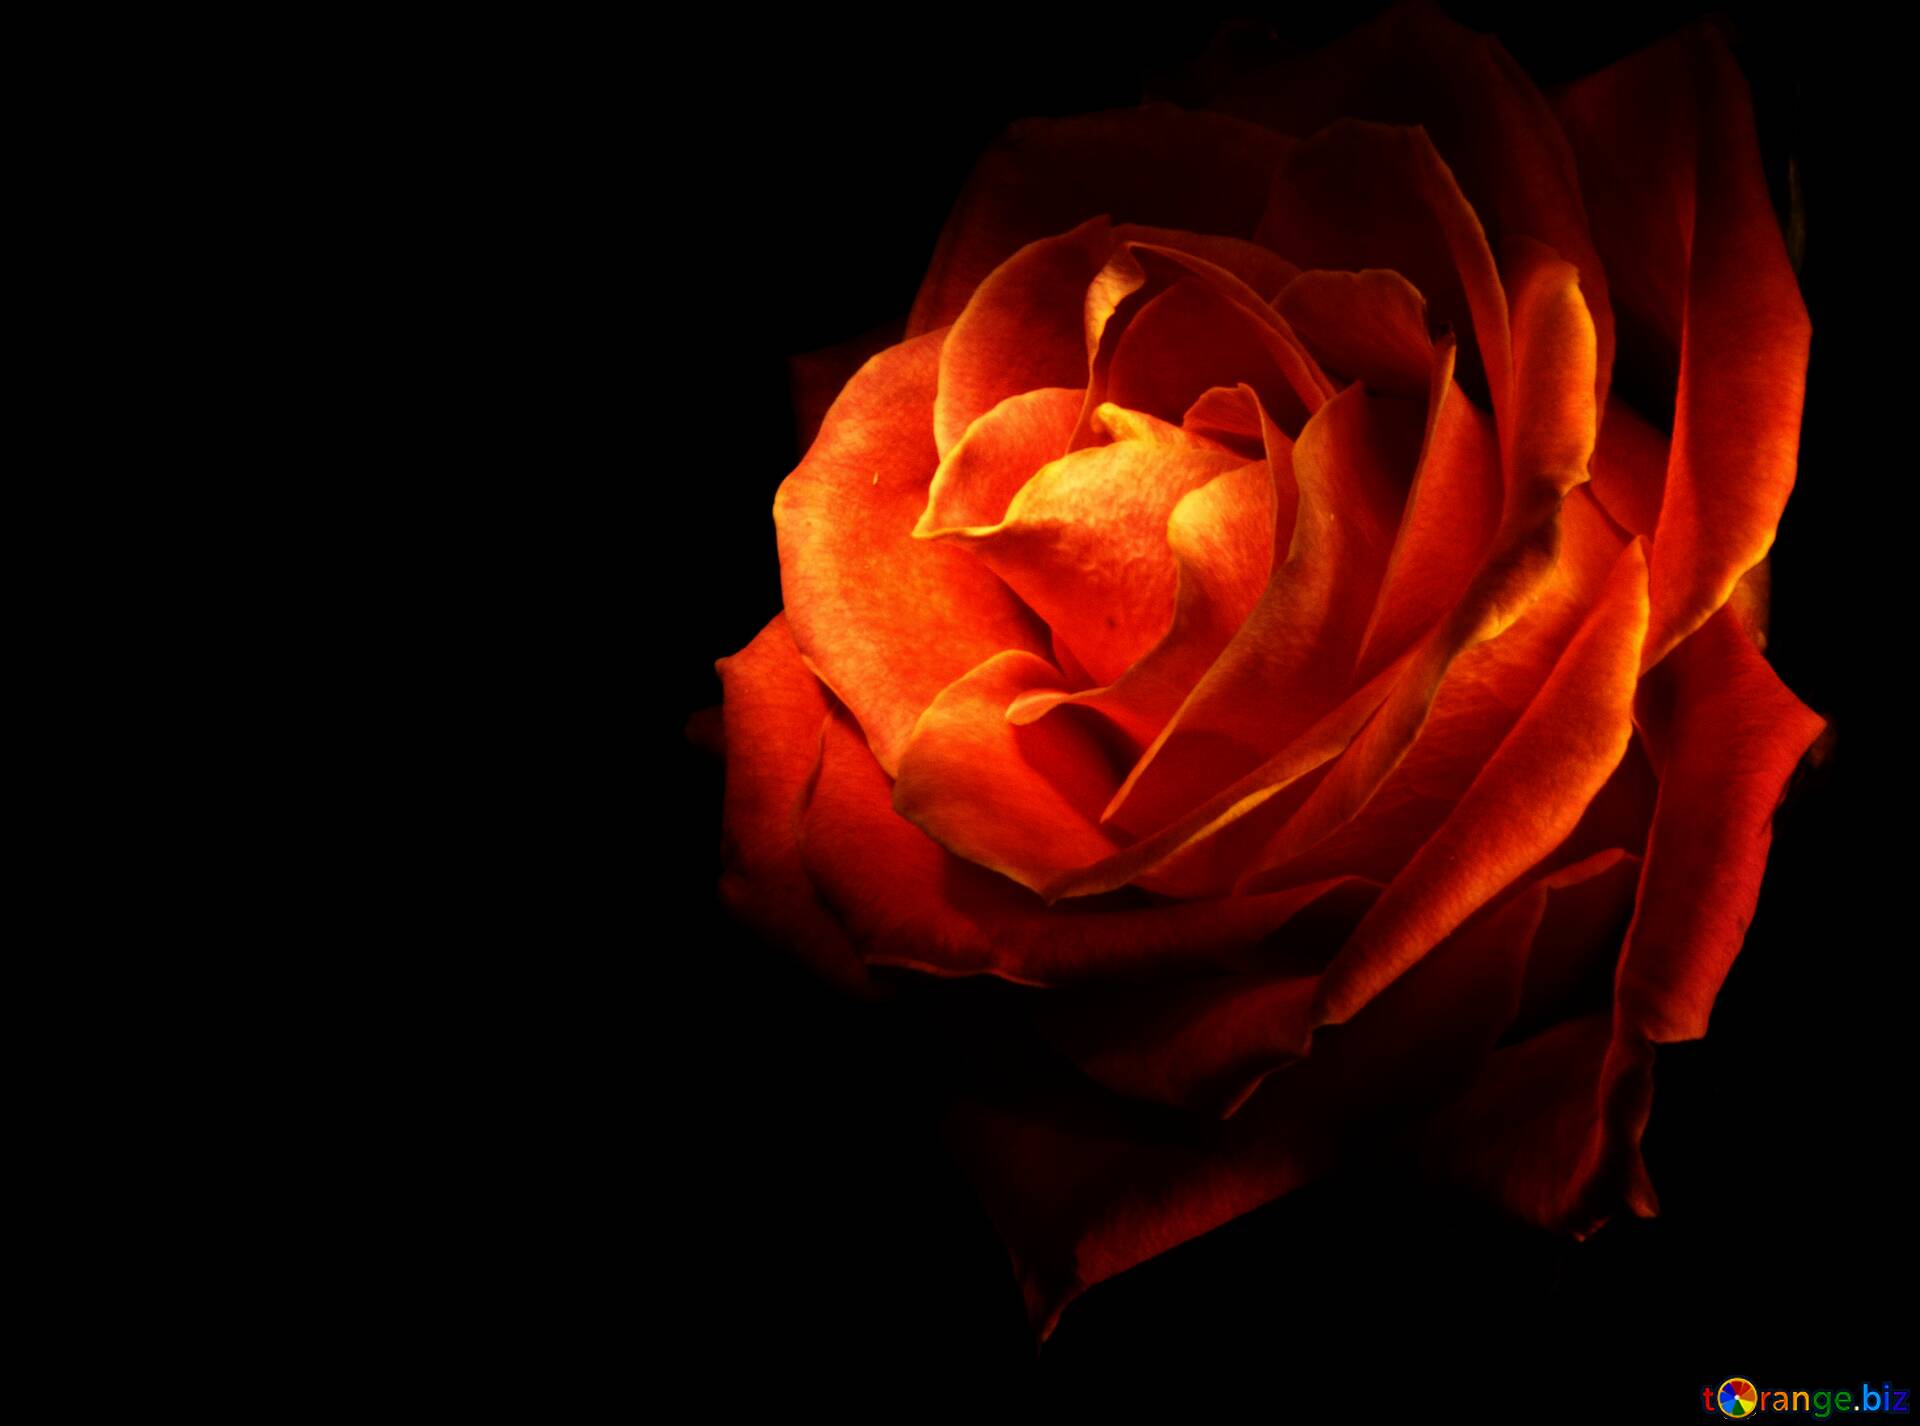 burning rose» 1080P, 2k, 4k Full HD Wallpapers, Backgrounds Free Download |  Wallpaper Crafter